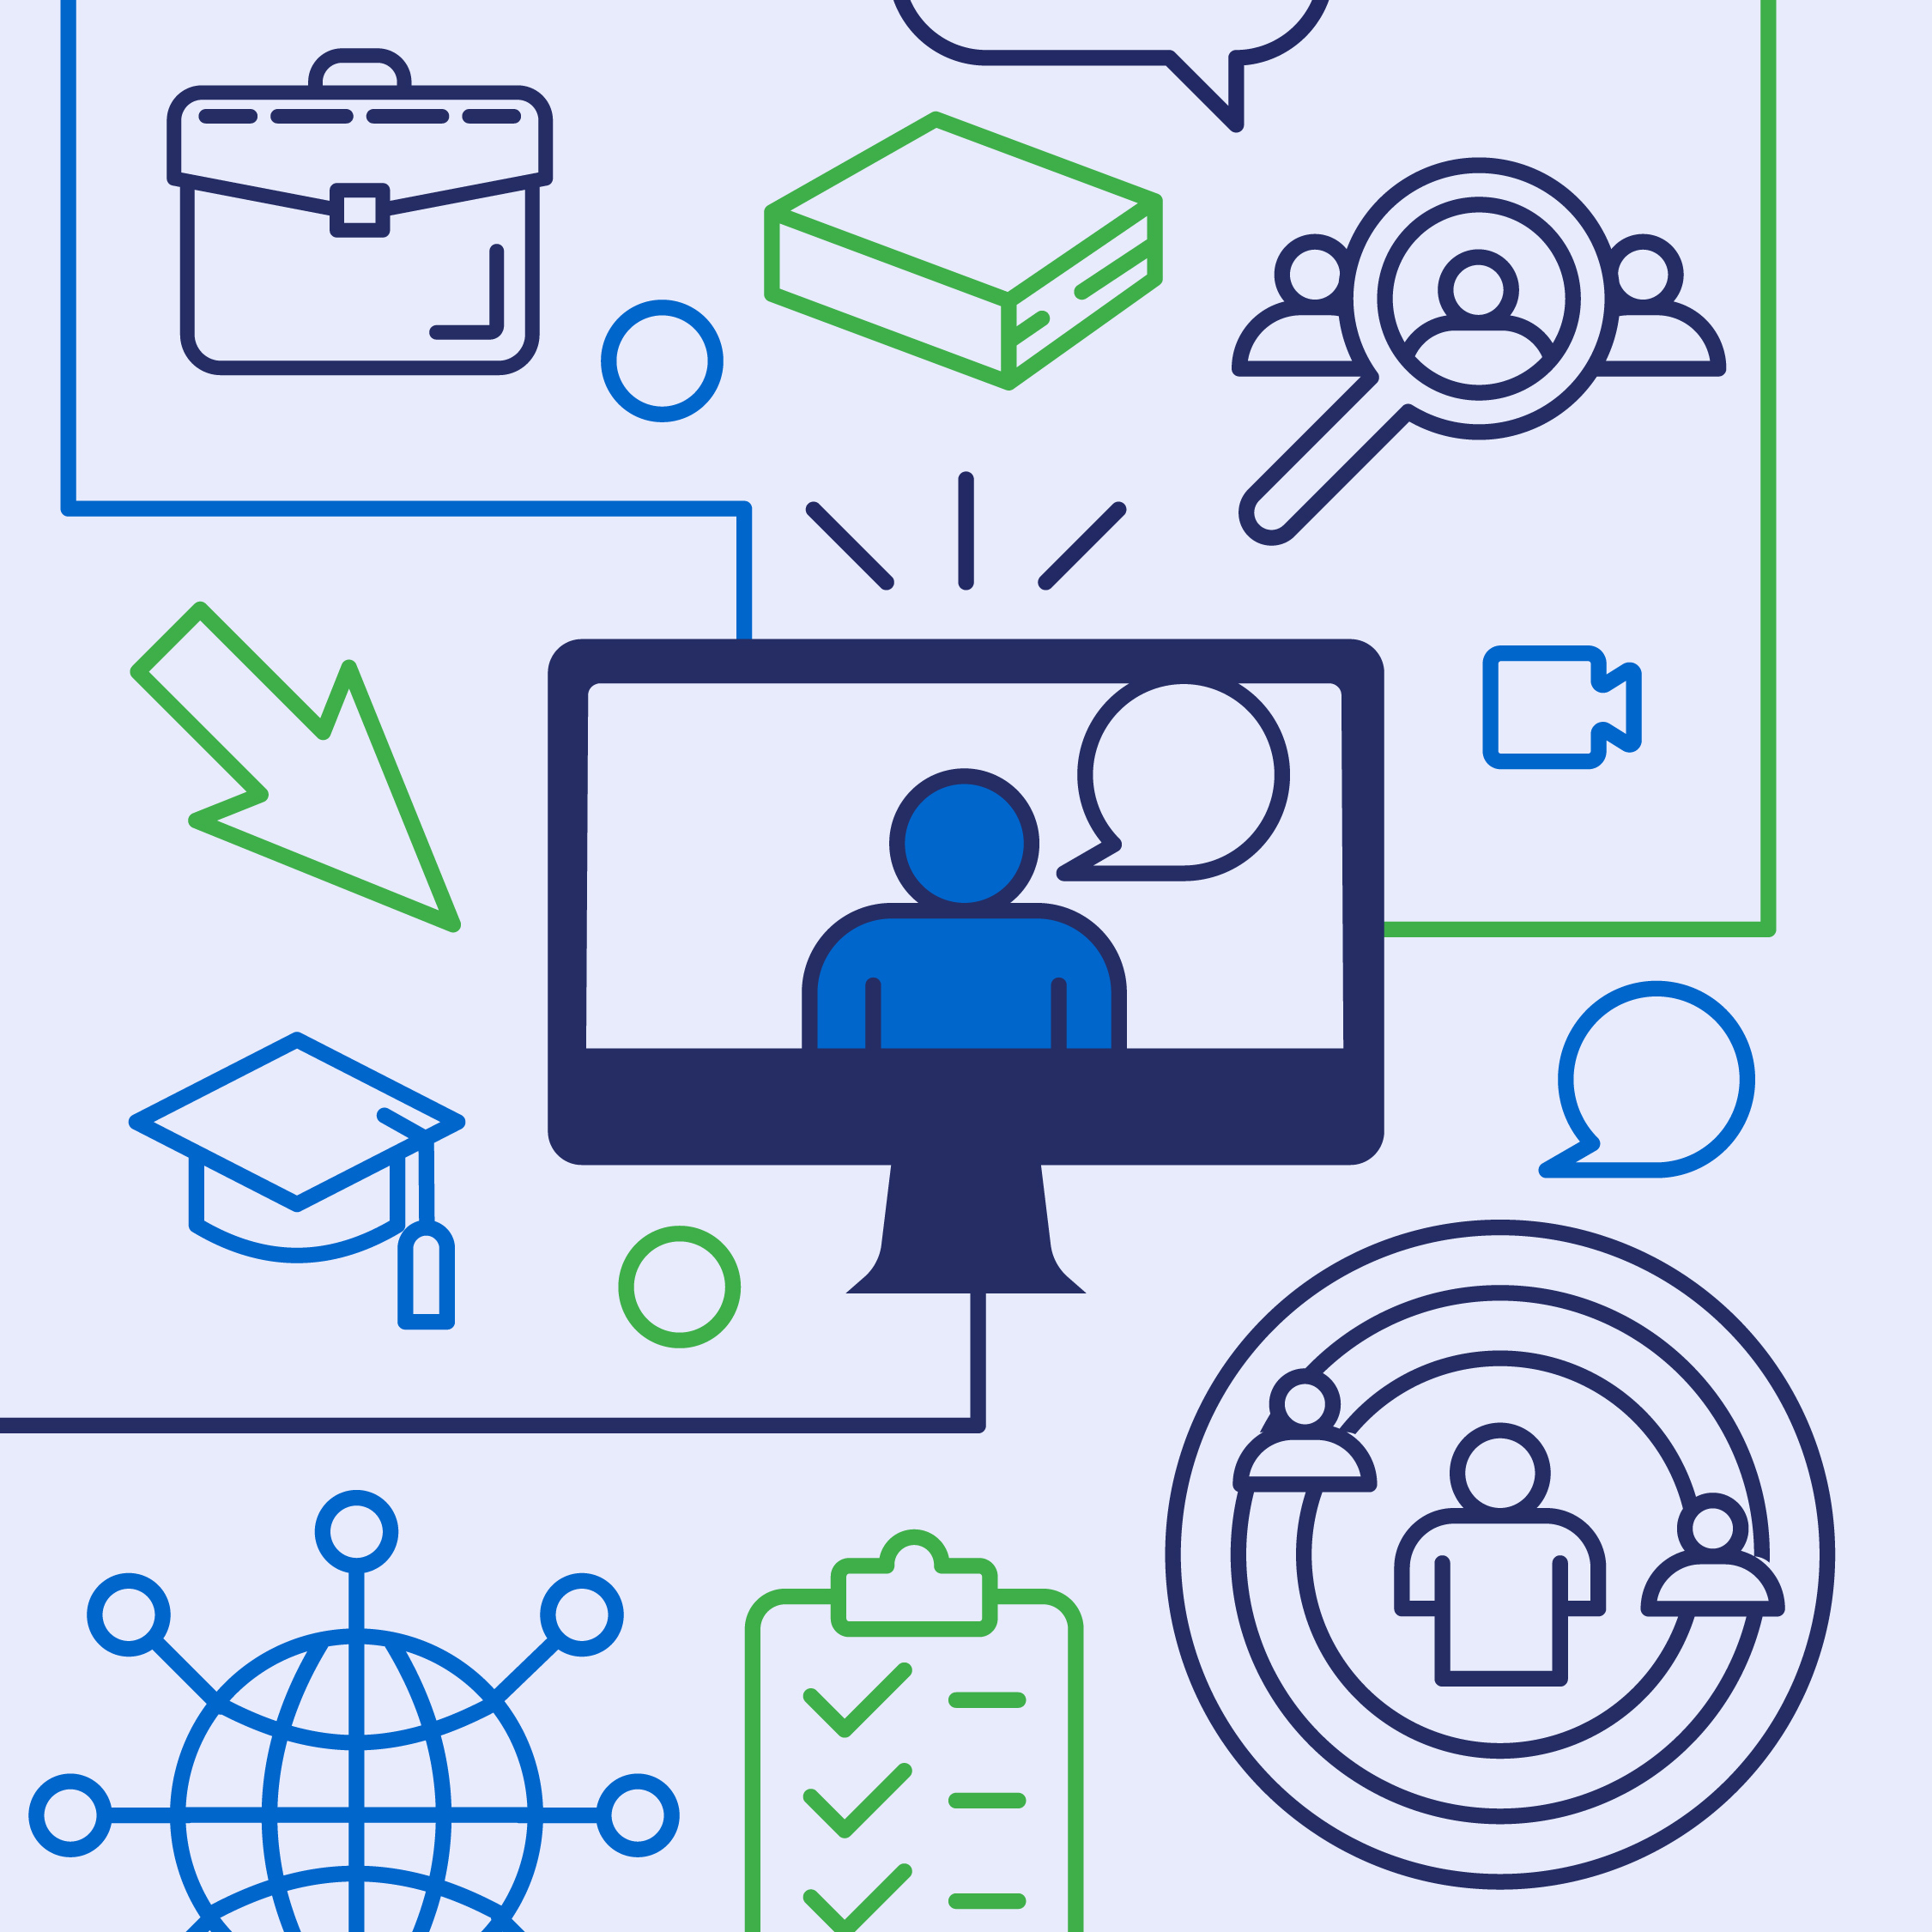 Simple outlined illustration with computer and candidate in a virtual meeting, with career-themed icons surrounding the computer.